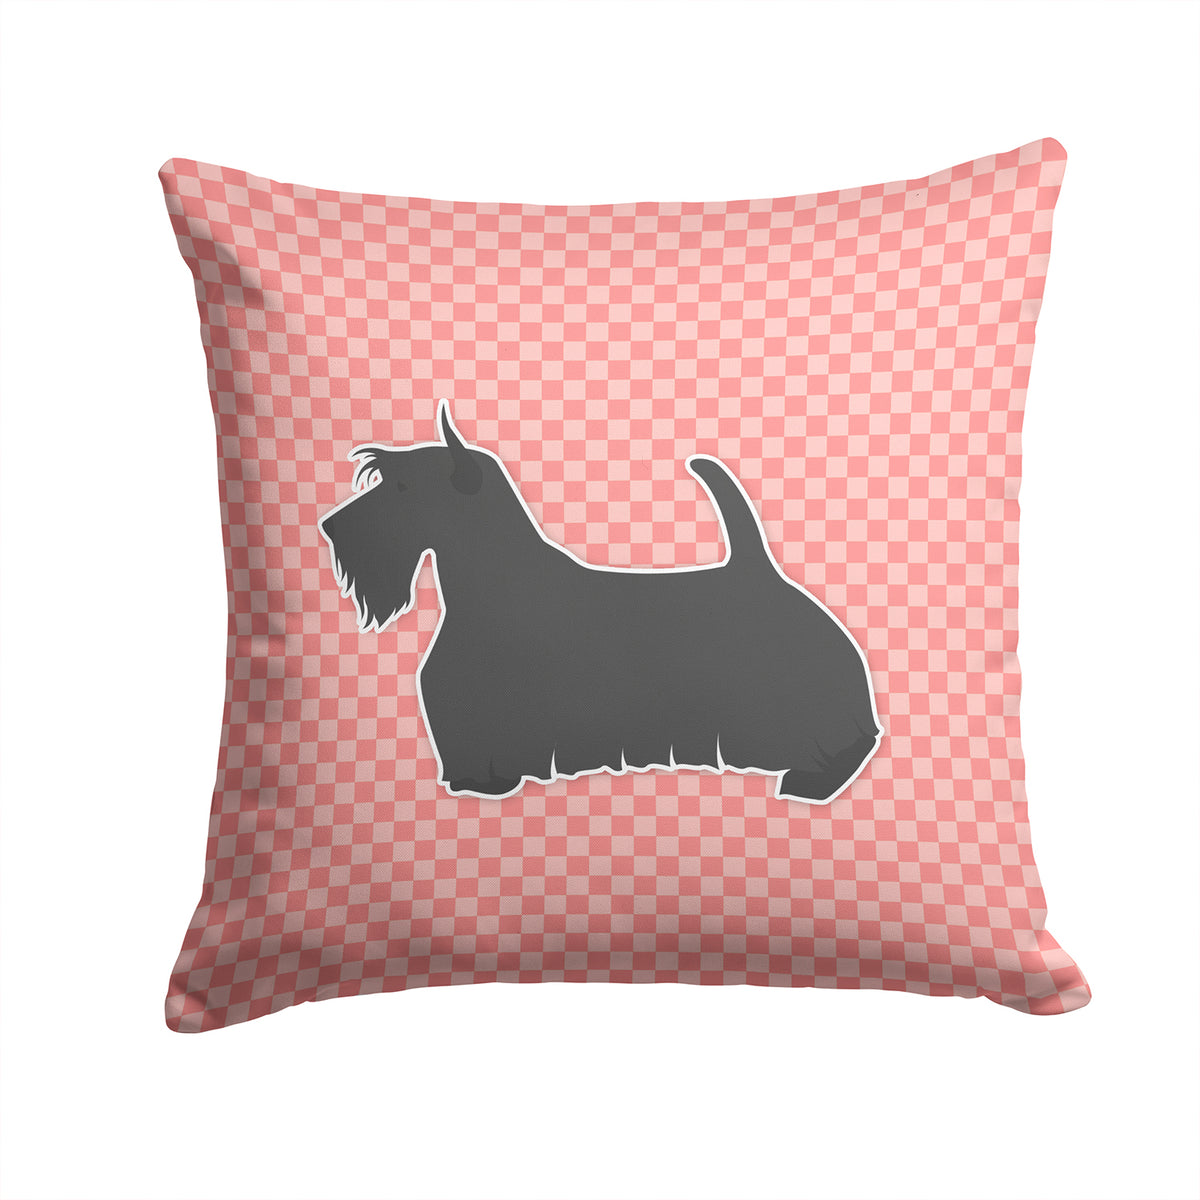 Scottish Terrier Checkerboard Pink Fabric Decorative Pillow BB3669PW1414 - the-store.com